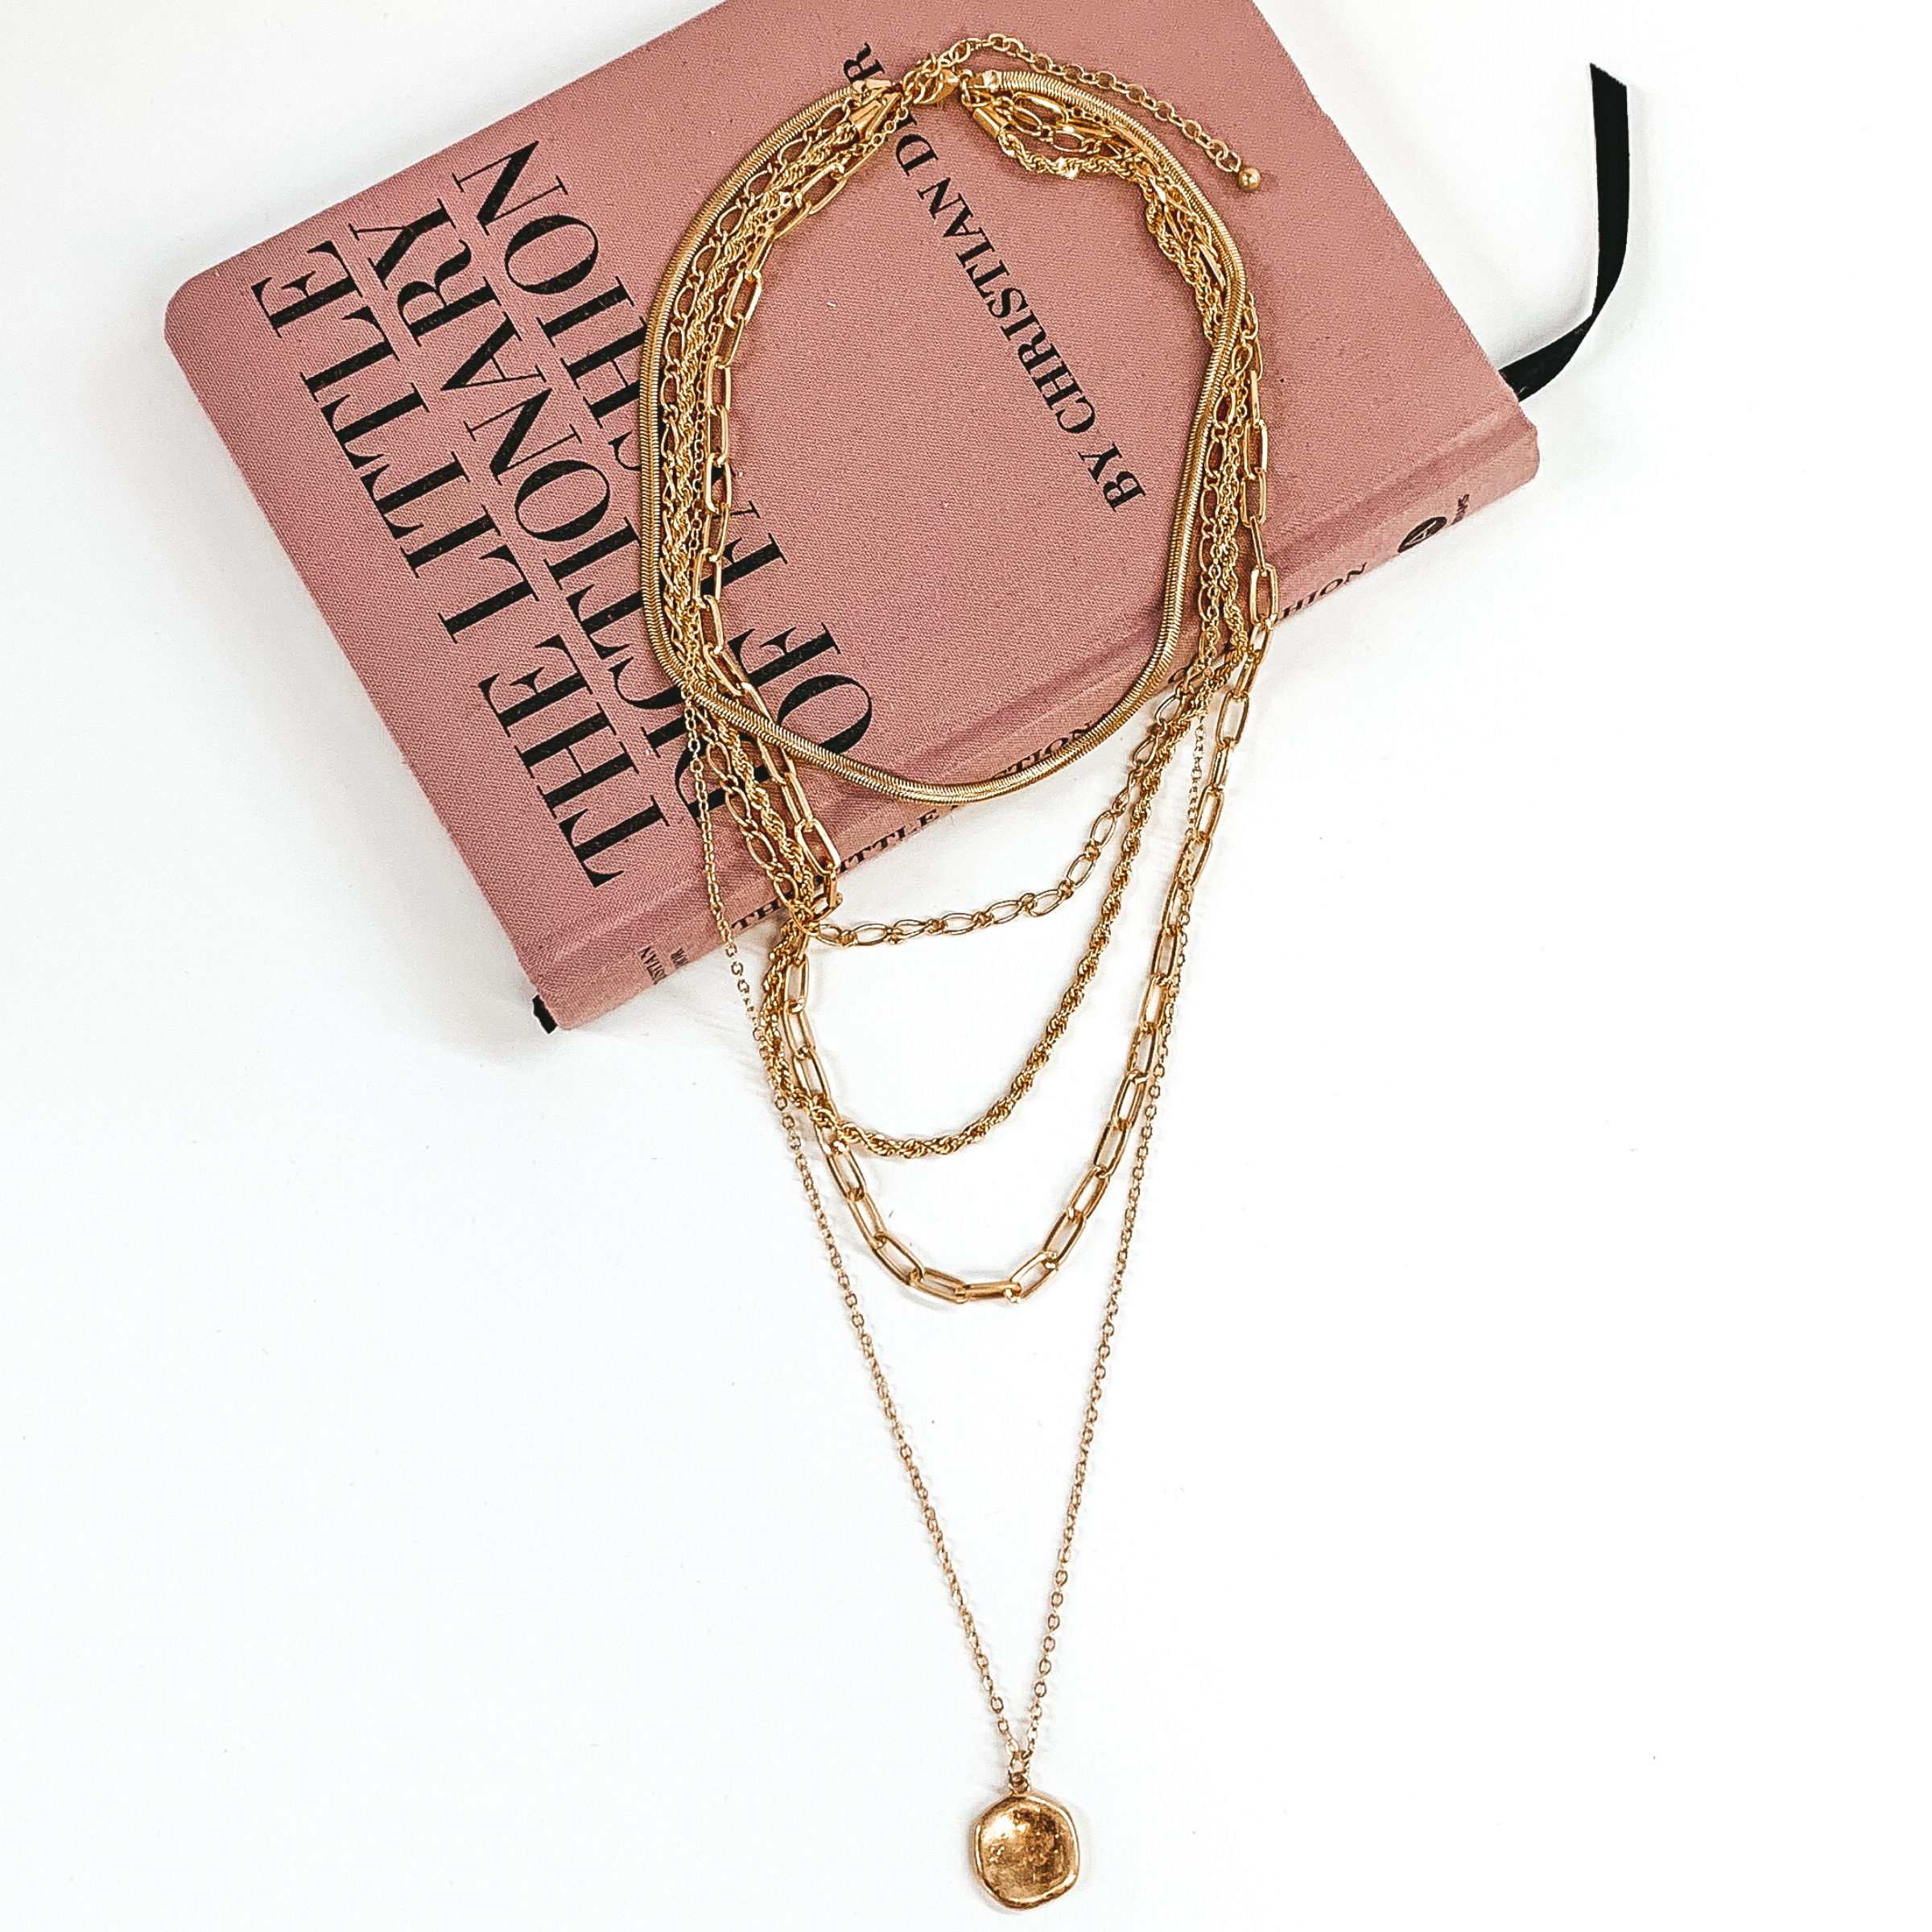 Gold multi chained necklace. This necklace has different types of chain for each strand and the longest strand has a circle pendant. This necklace is pictured laying partially on a mauve colored book on a white background. 